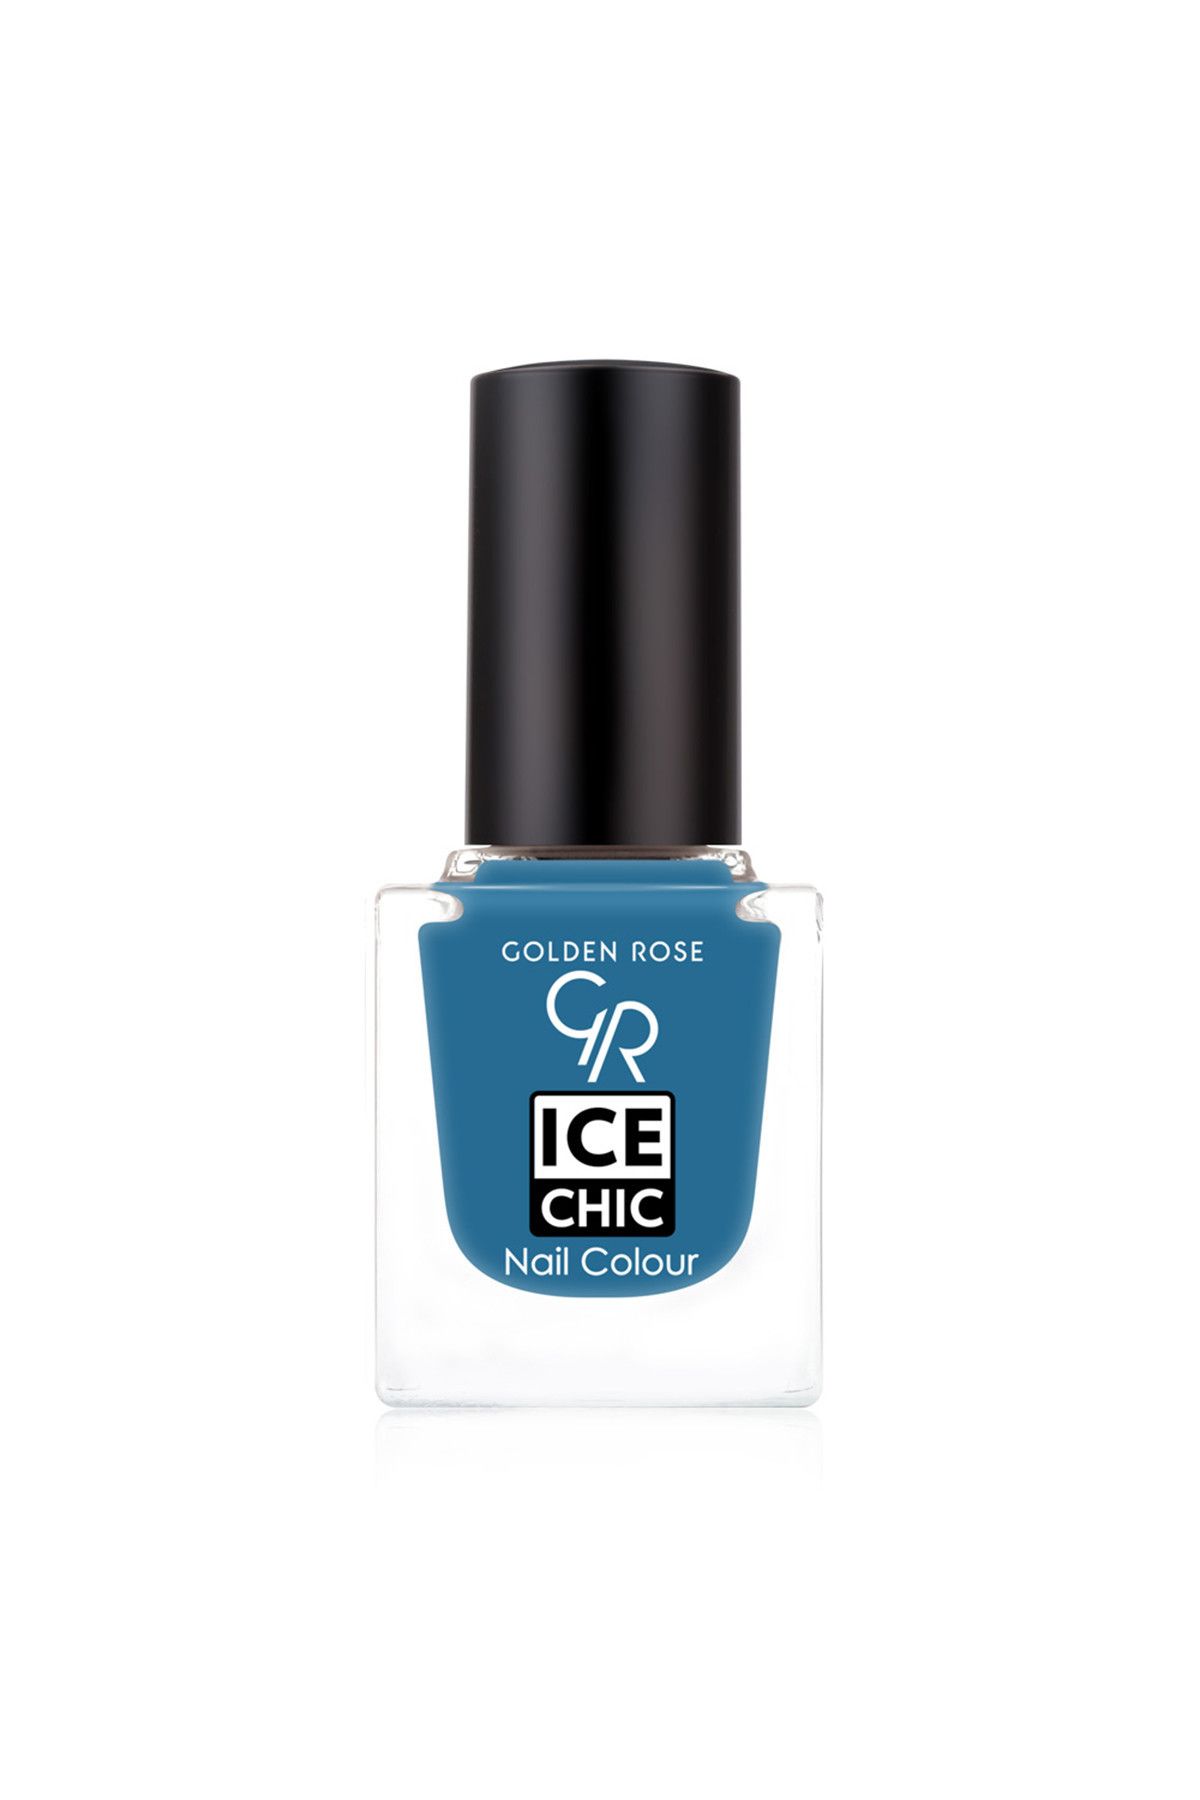 Golden Rose Oje - Ice Chic Nail Colour No: 125 8691190873851